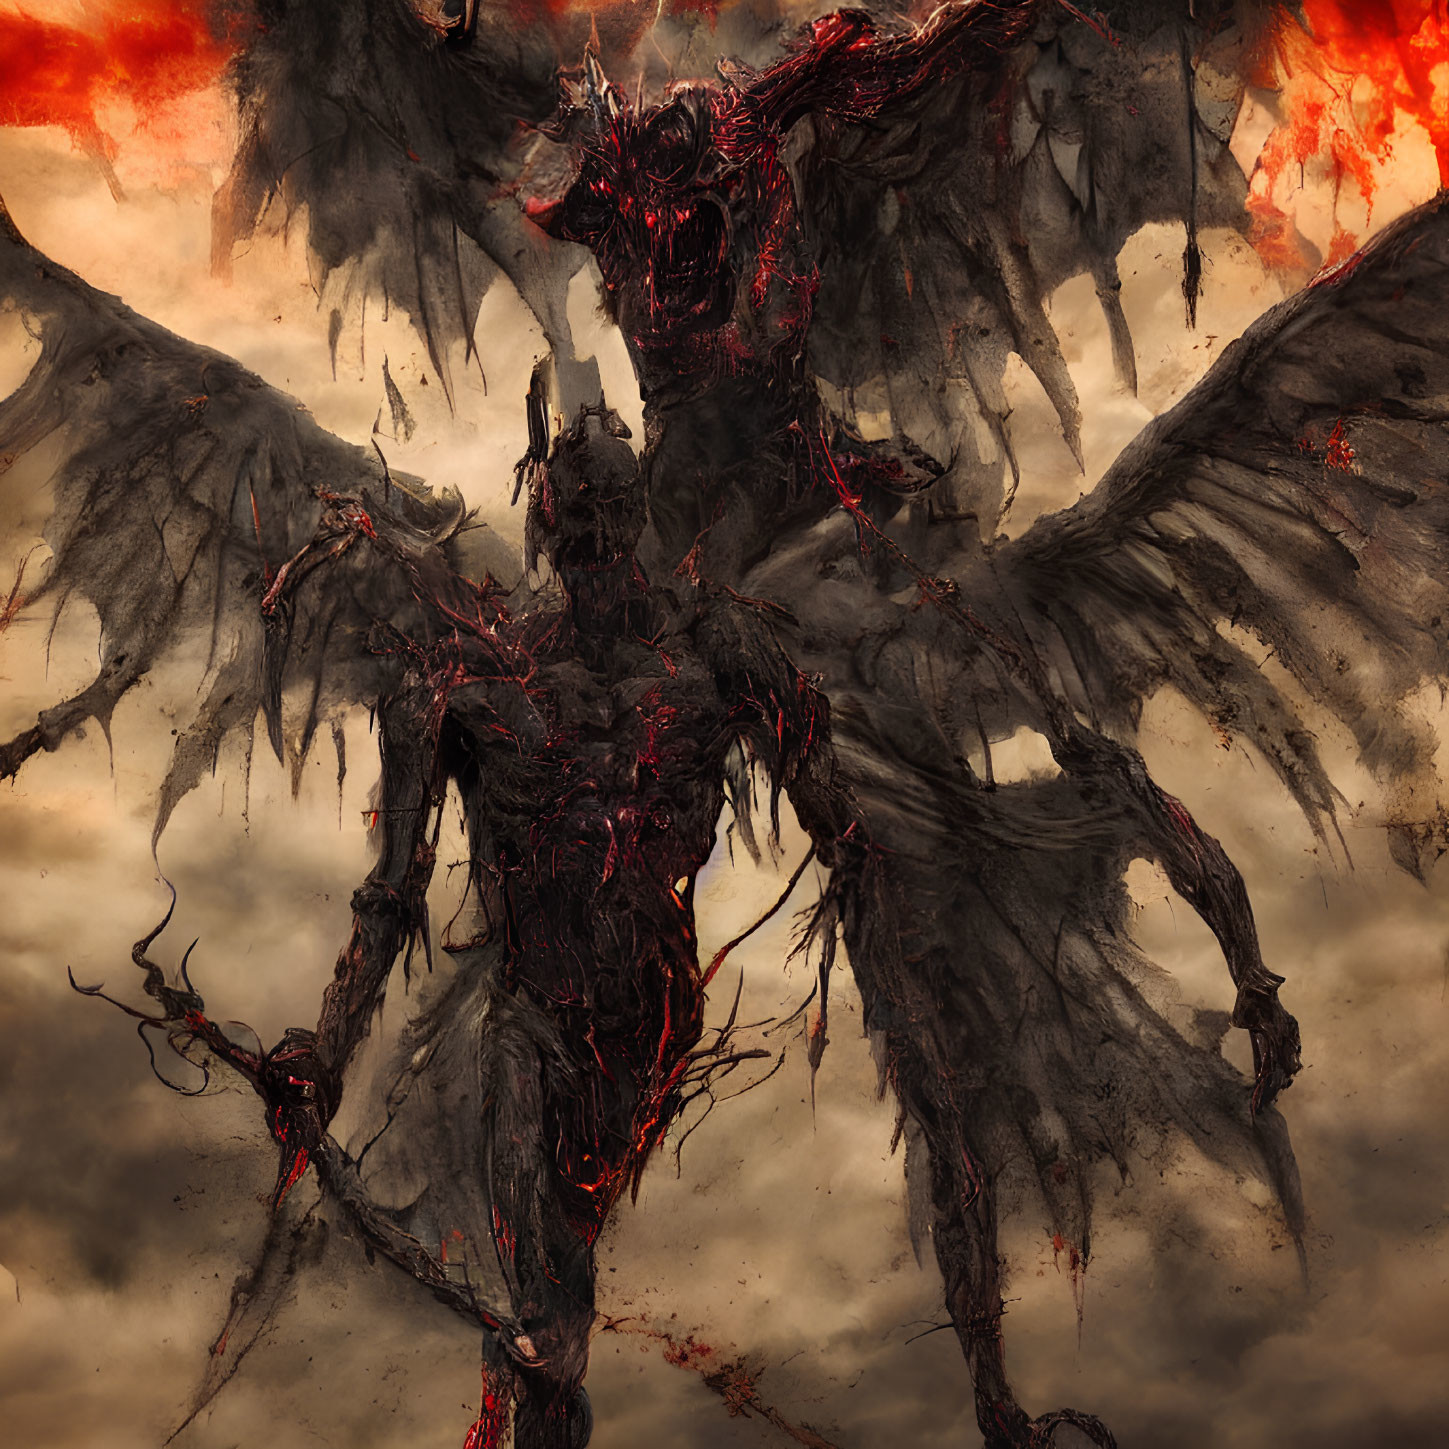 Dark Winged Creature with Glowing Red Eyes in Fiery Cloudy Backdrop